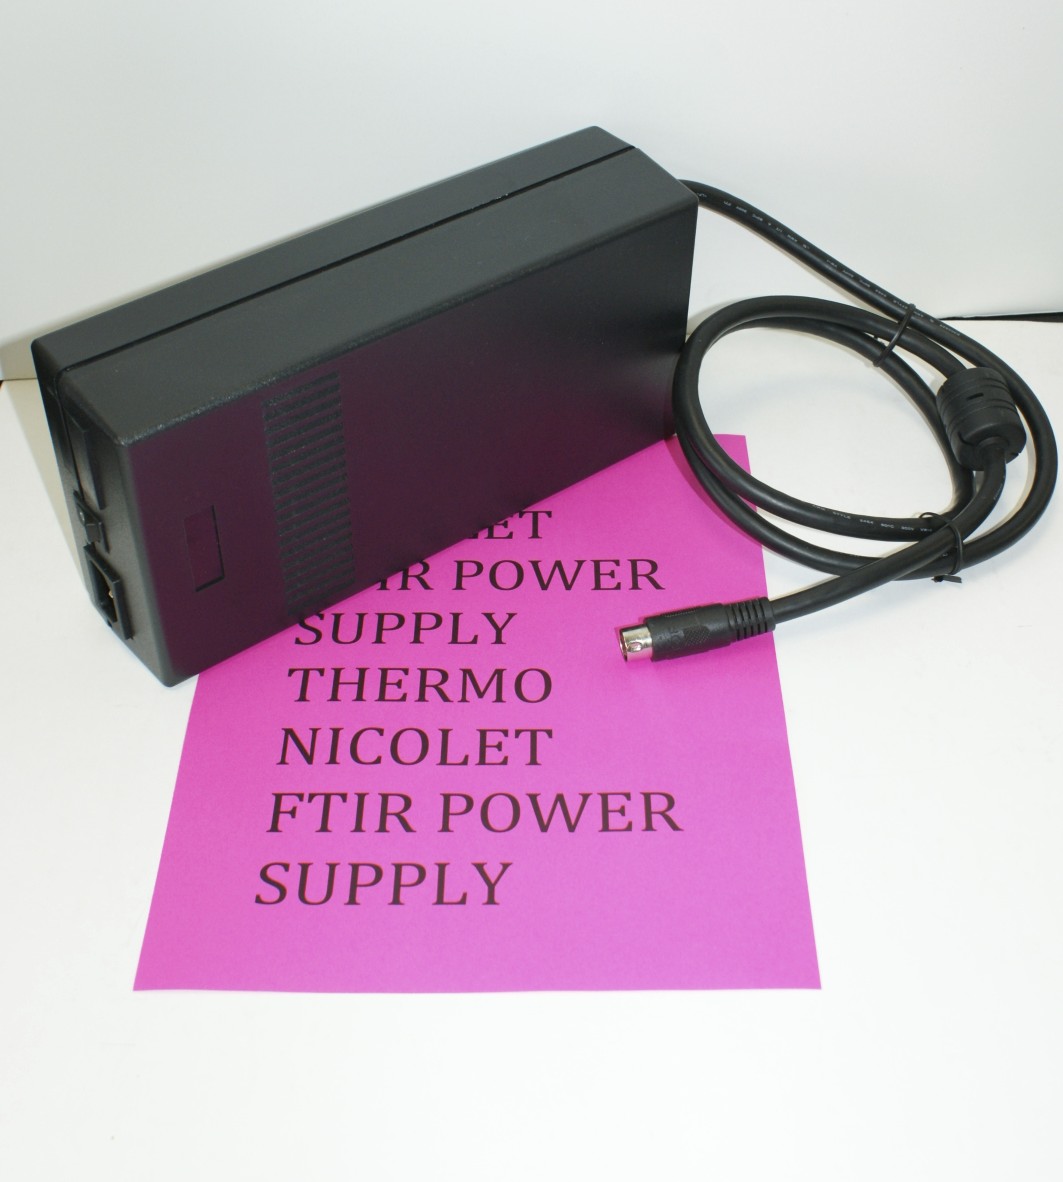 Thermo Nicolet Power Supply